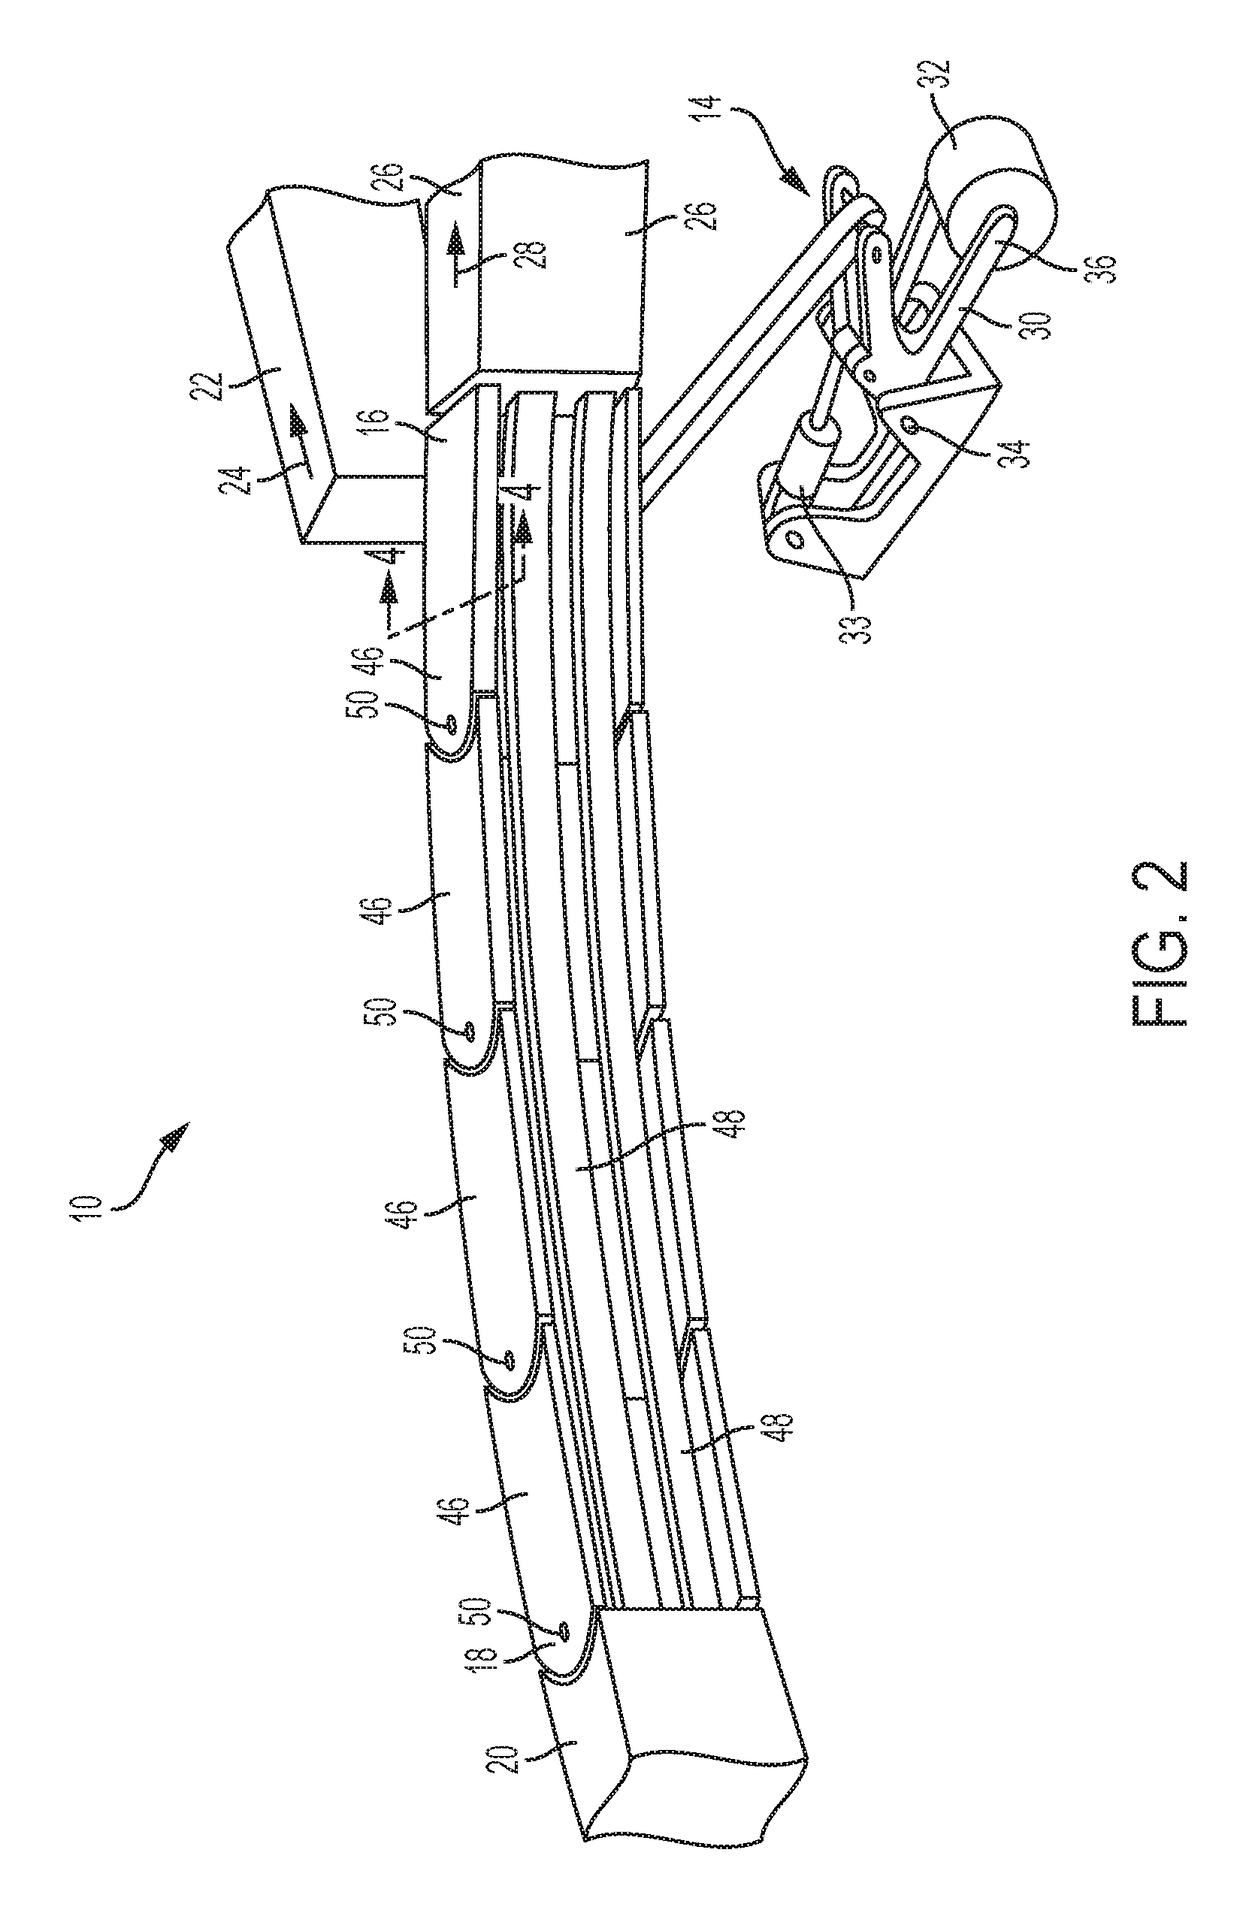 Monorail Switch Using a Gravity-Assisted Actuating Mechanism